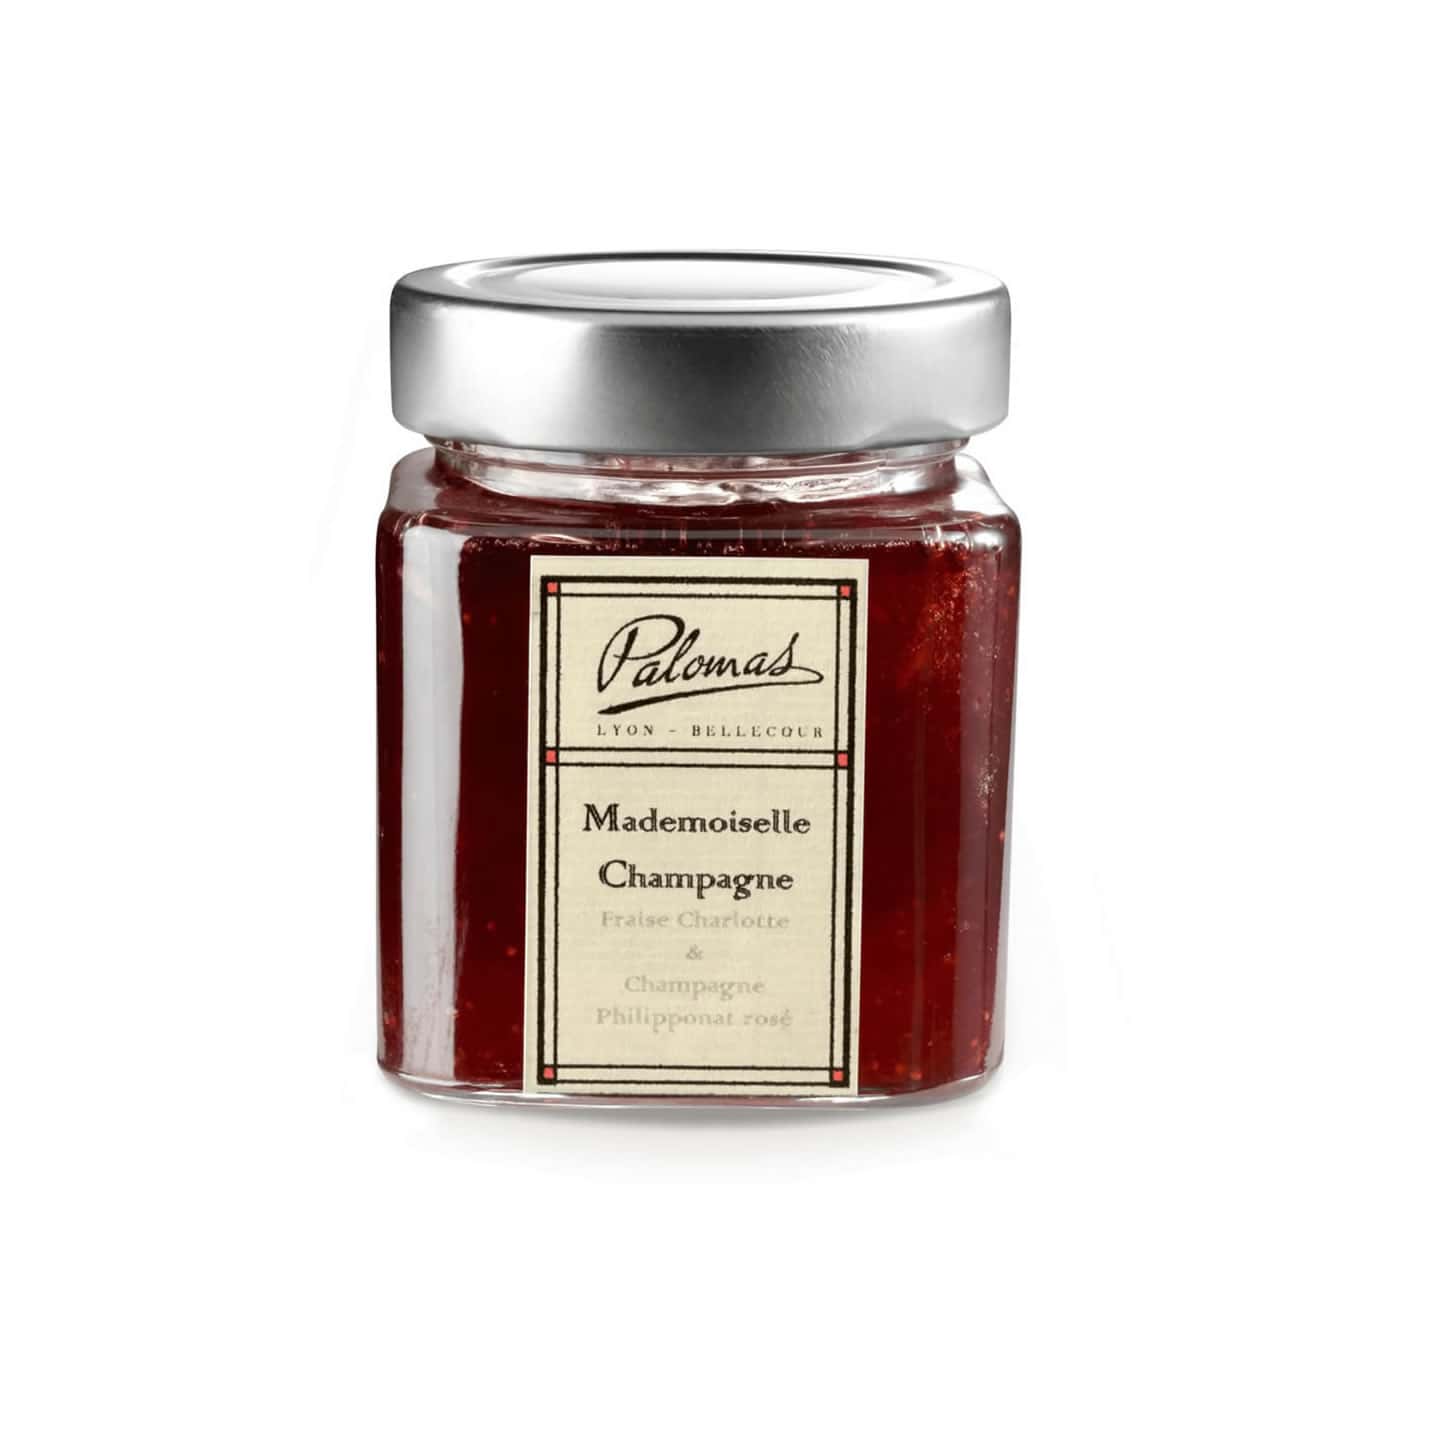 Confiture Fraise Champagne 'Extra' 240g Mademoiselle Champagne